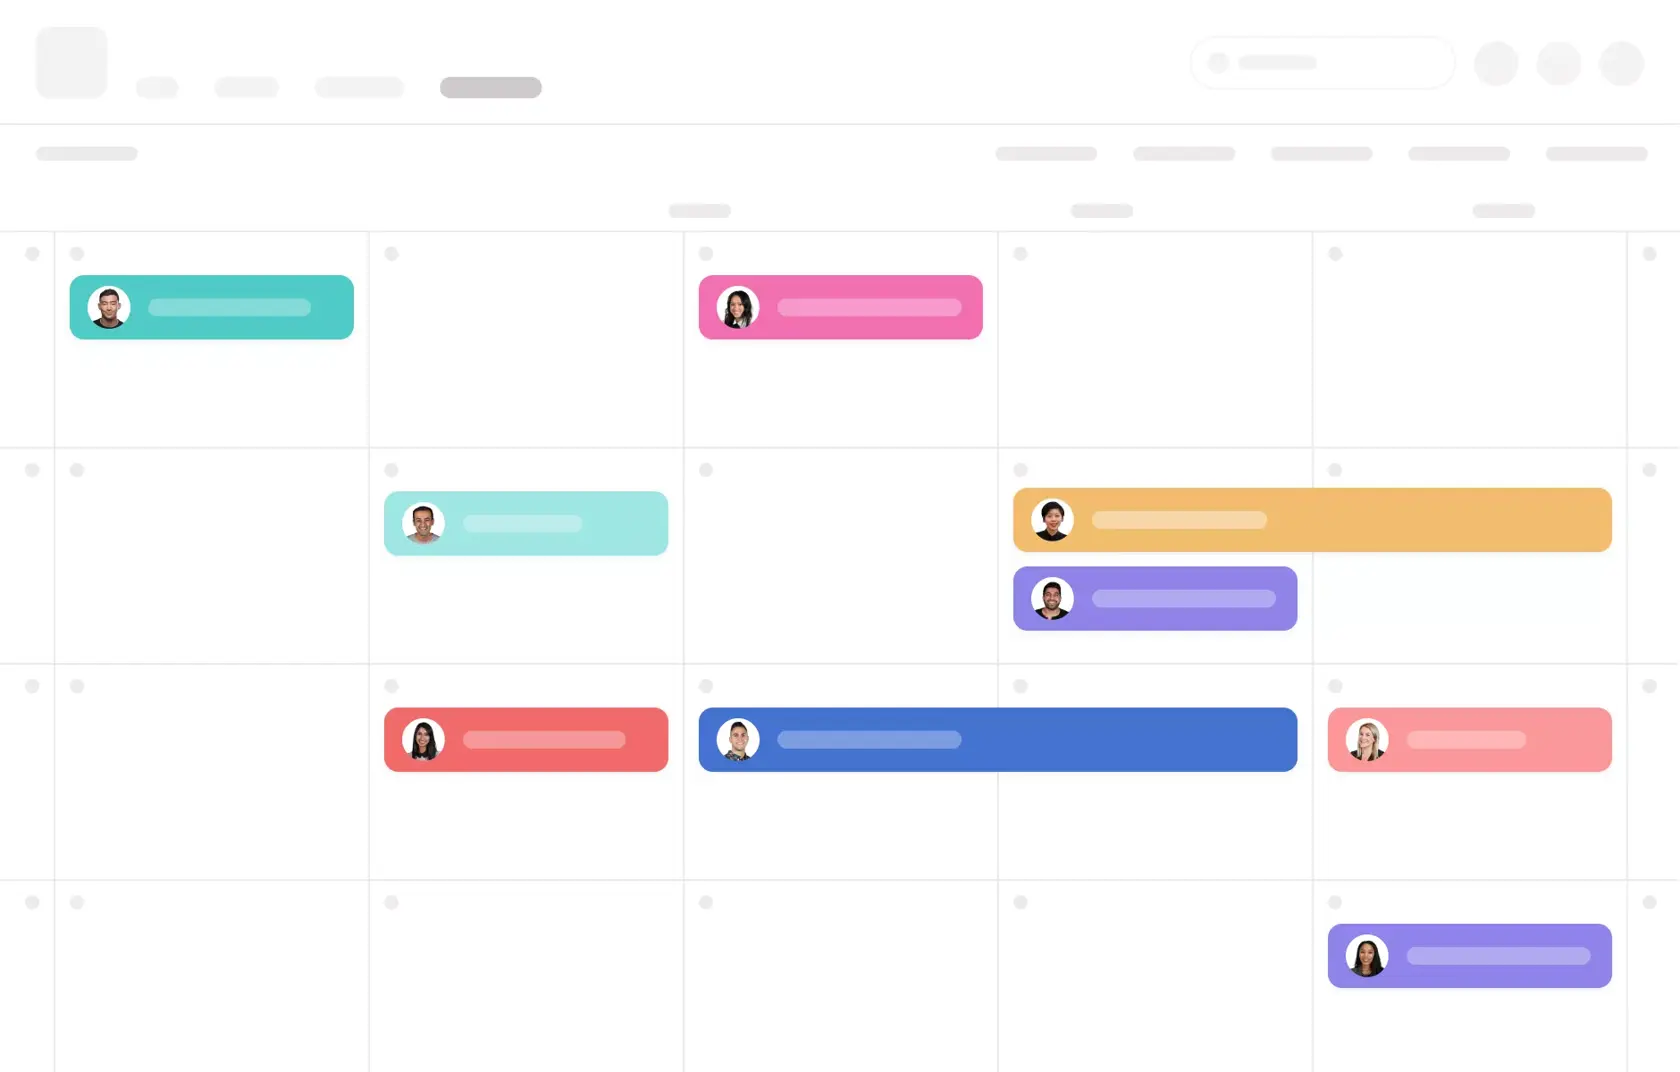 [Product UI] Example calendar layout with abstracted UI (Calendar view)